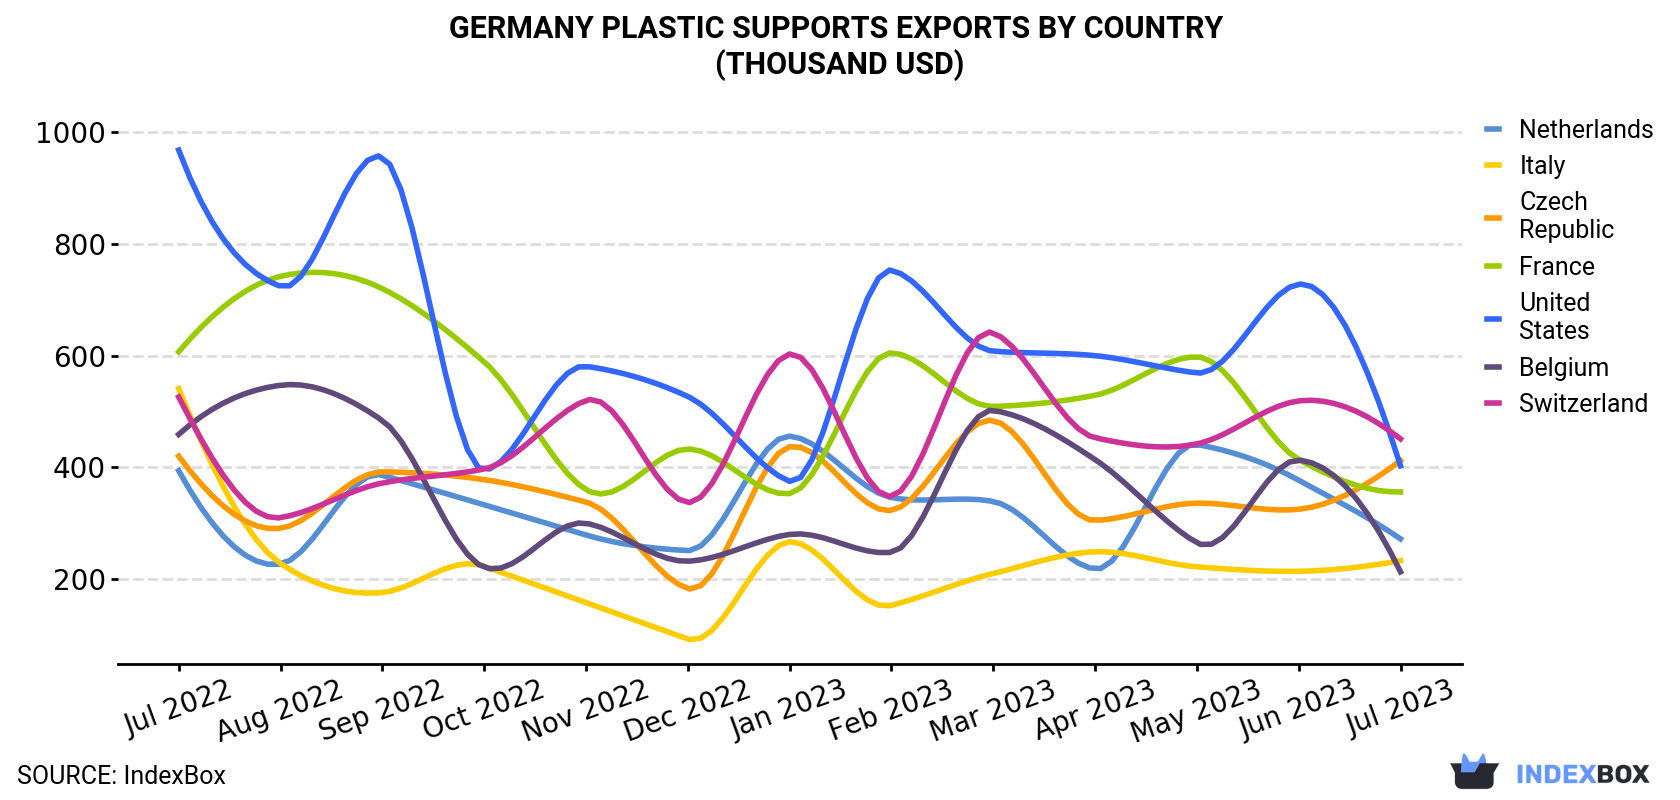 Germany Plastic Supports Exports By Country (Thousand USD)